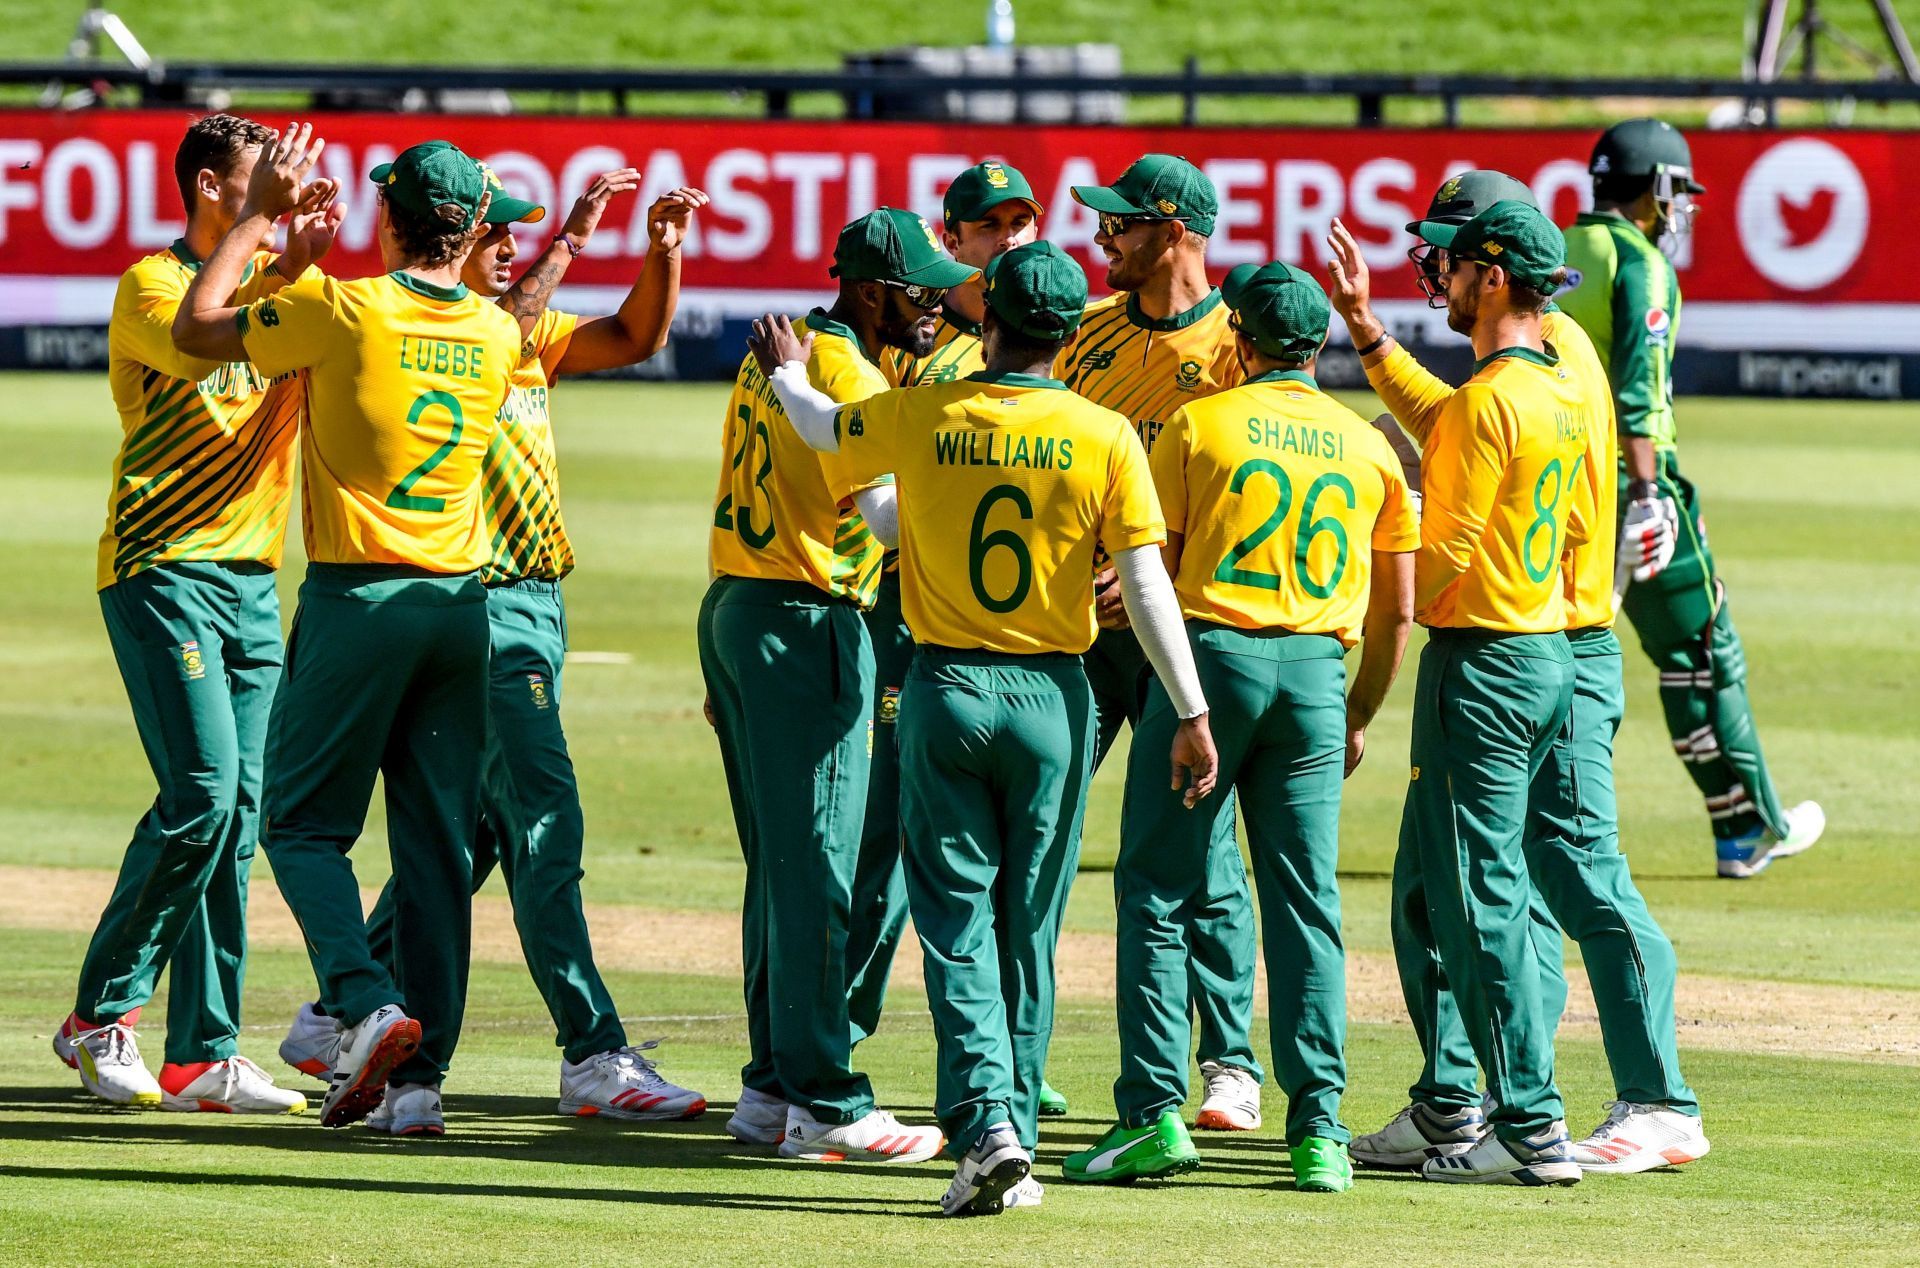 The Proteas lost their last Super League fixtures against Bangladesh. (Credits: Getty)